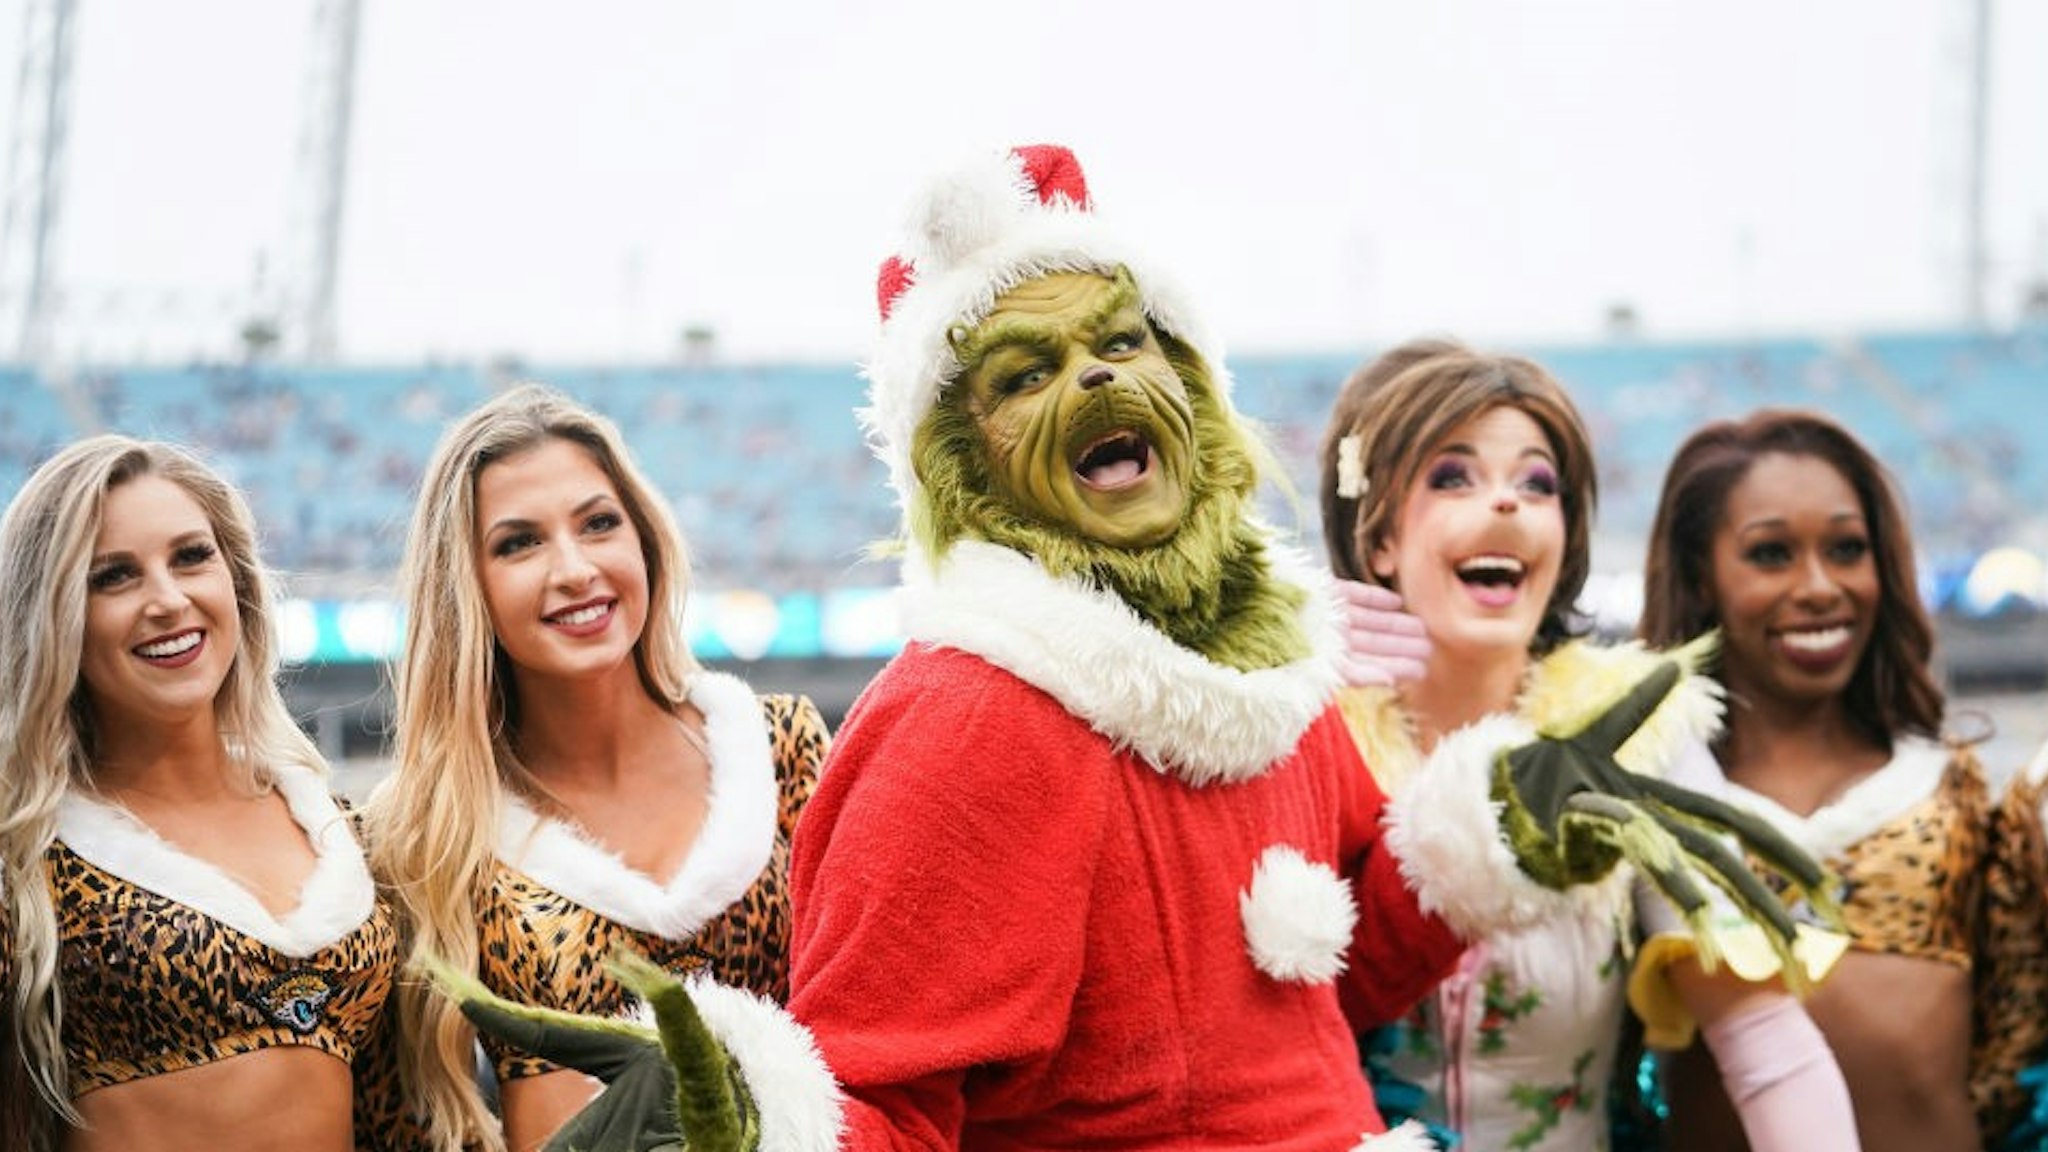 JACKSONVILLE, FLORIDA - DECEMBER 08: The Grinch poses with cheerleaders from the Jacksonville Jaguars before the start of a game against the Los Angeles Chargers at TIAA Bank Field on December 08, 2019 in Jacksonville, Florida. (Photo by